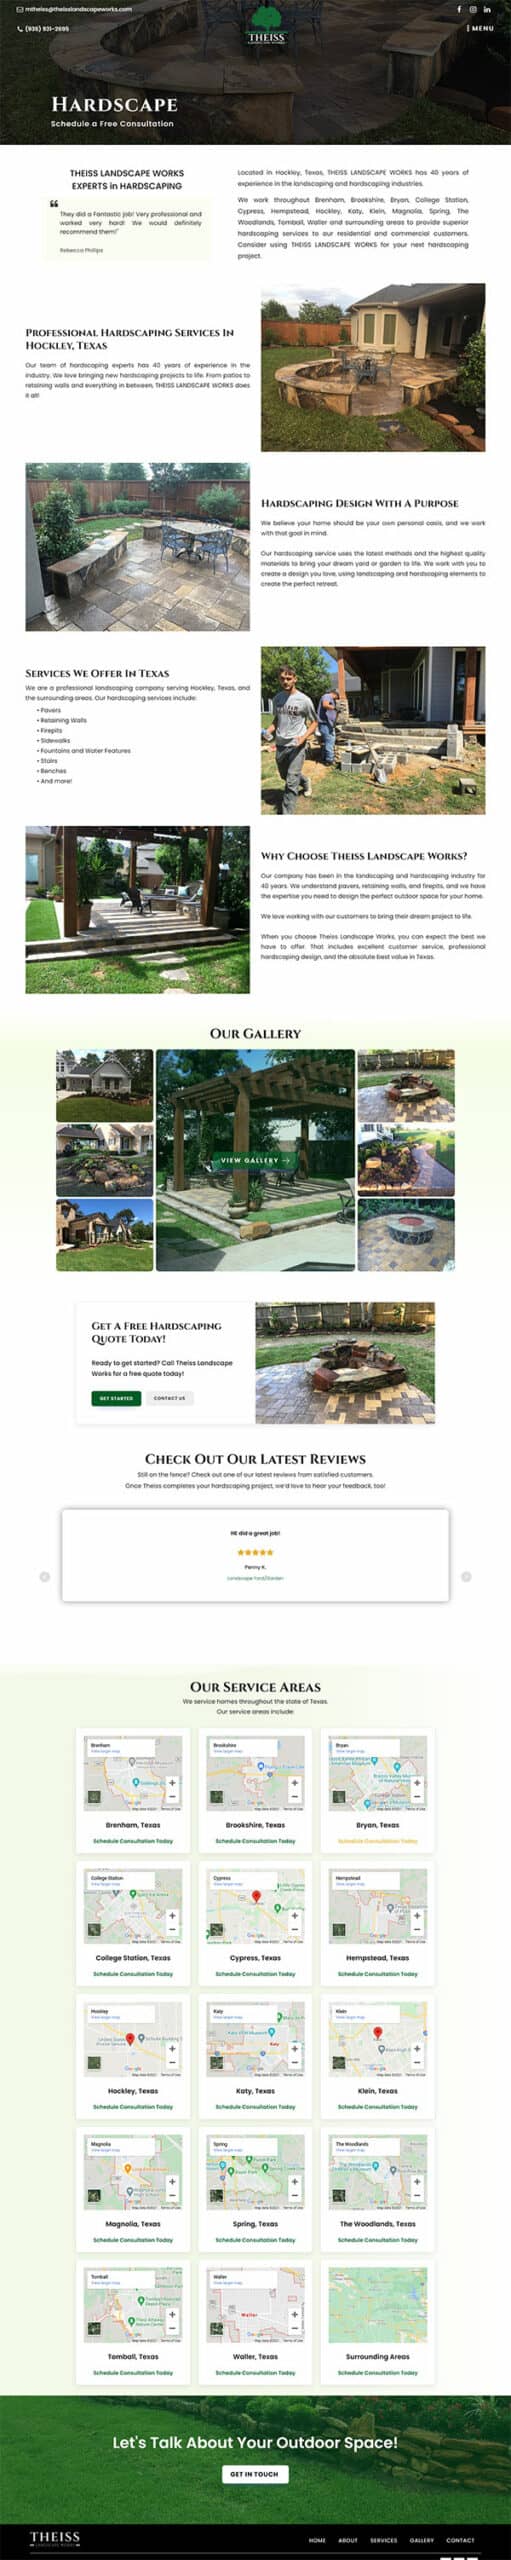 Theiss Landscape Works Hardscape Page